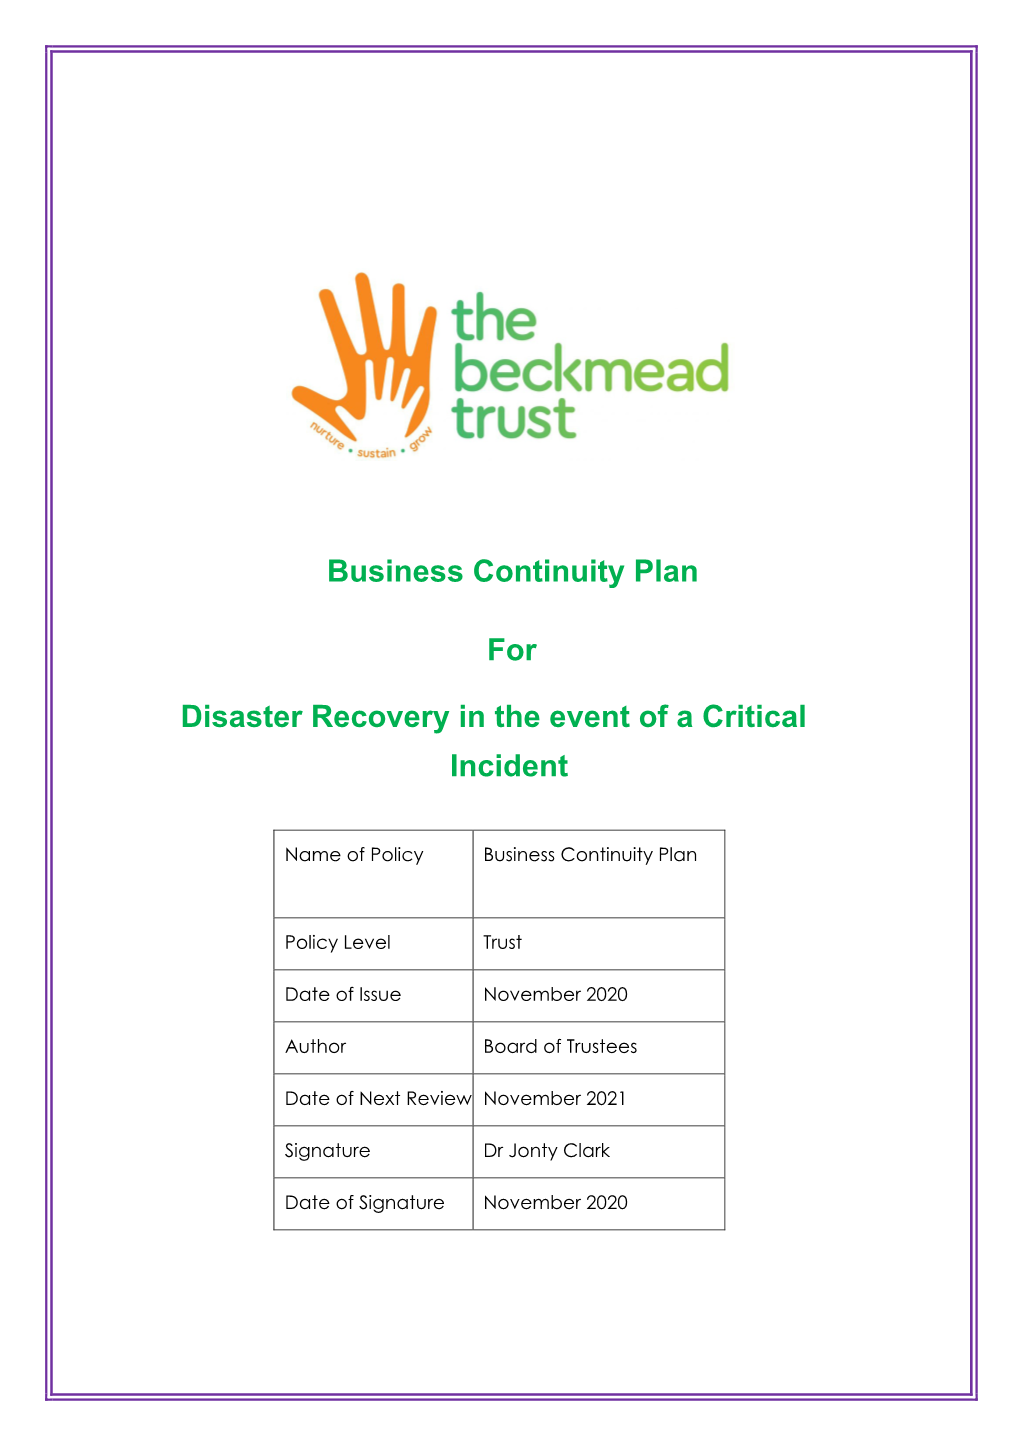 Business Continuity Plan for Disaster Recovery in the Event of A